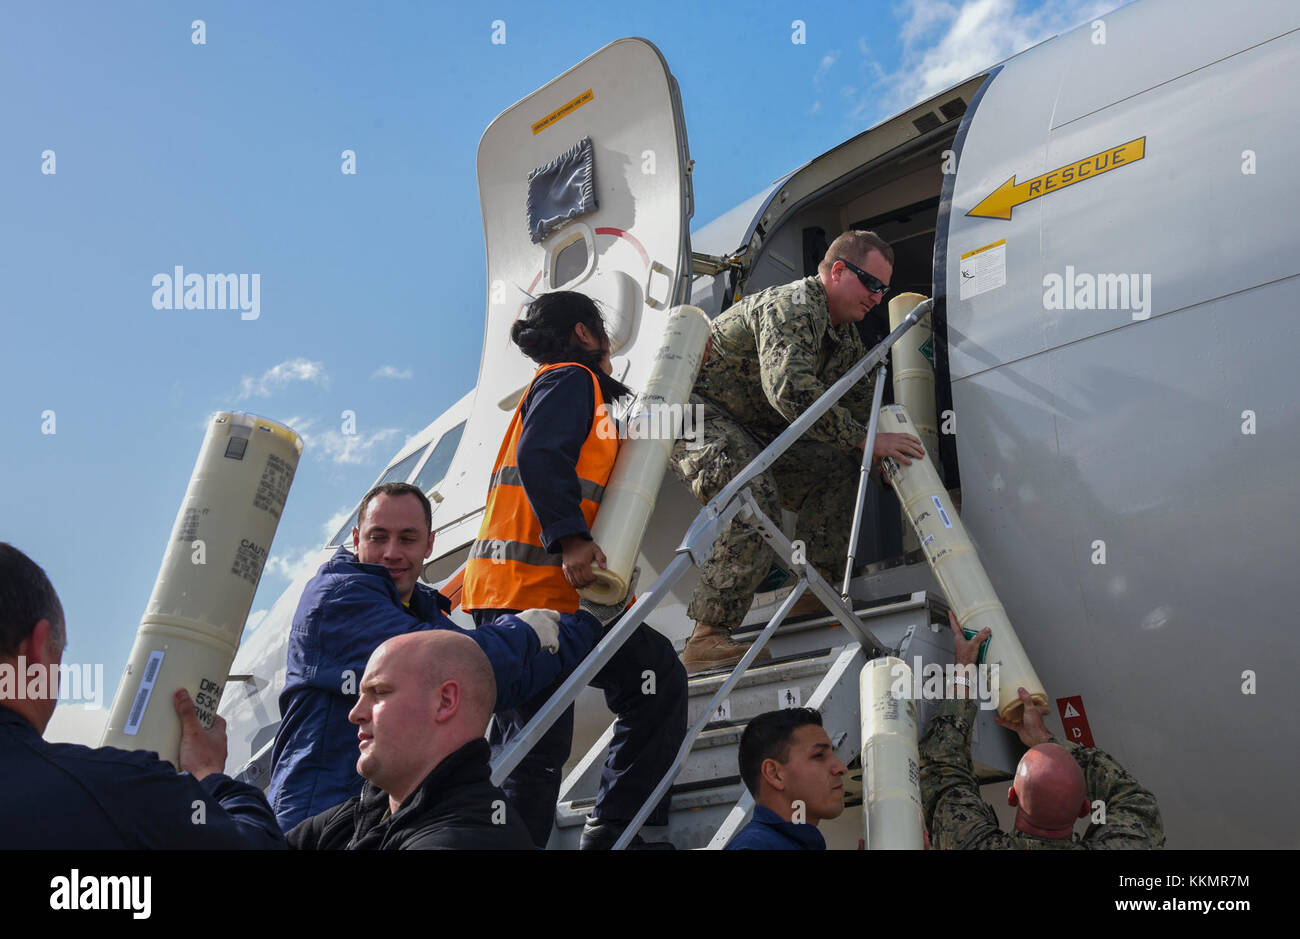 Bahia Blanca, ARGENTINA (Nov. 23, 2017) Members of the Argentine Navy help Sailors from the ‘Mad Foxes’ of Patrol Squadron (VP) 5 and the ‘Pelicans’ of VP-45 load sonobouys onto a P8-A Poseidon aircraft.  Sailors from VP-5 and VP-45 are currently in Bahia Blanca as part of a detachment from Commander, Patrol and Reconnaissance Wing (CPRW) 11 assisting the Argentine military in their search for the missing Argentine submarine ARA San Juan.  (U.S. Navy photo by Mass Communications Specialist 2nd Class Sean R. Morton/Released) Stock Photo